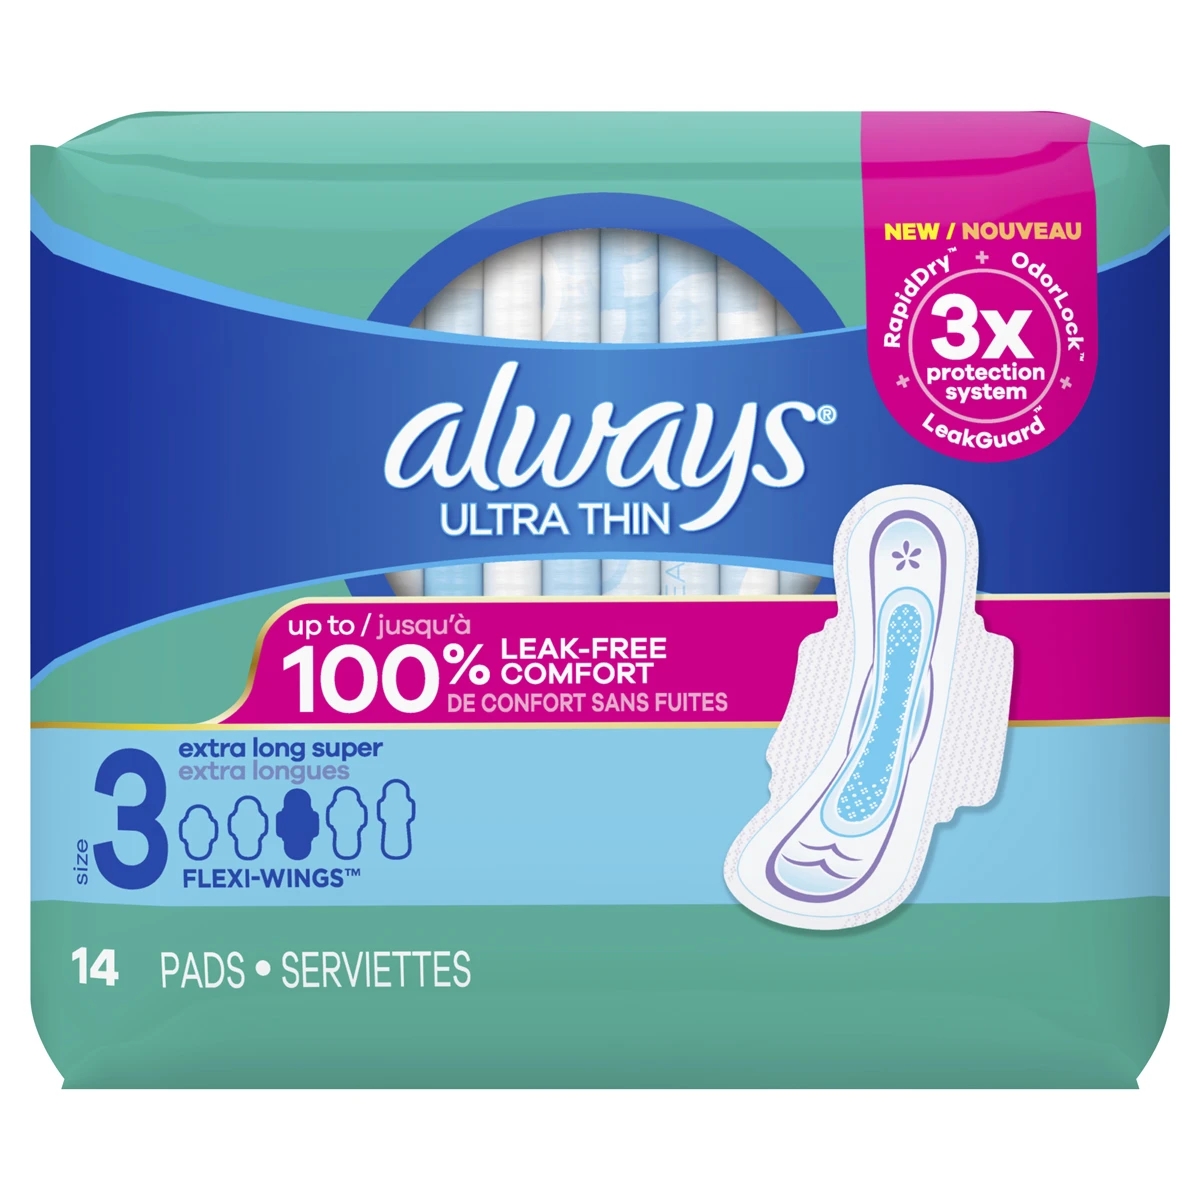 HSA Eligible  U by Kotex Security Maxi Pad with Wings, Overnight,  Unscented, 14 Count